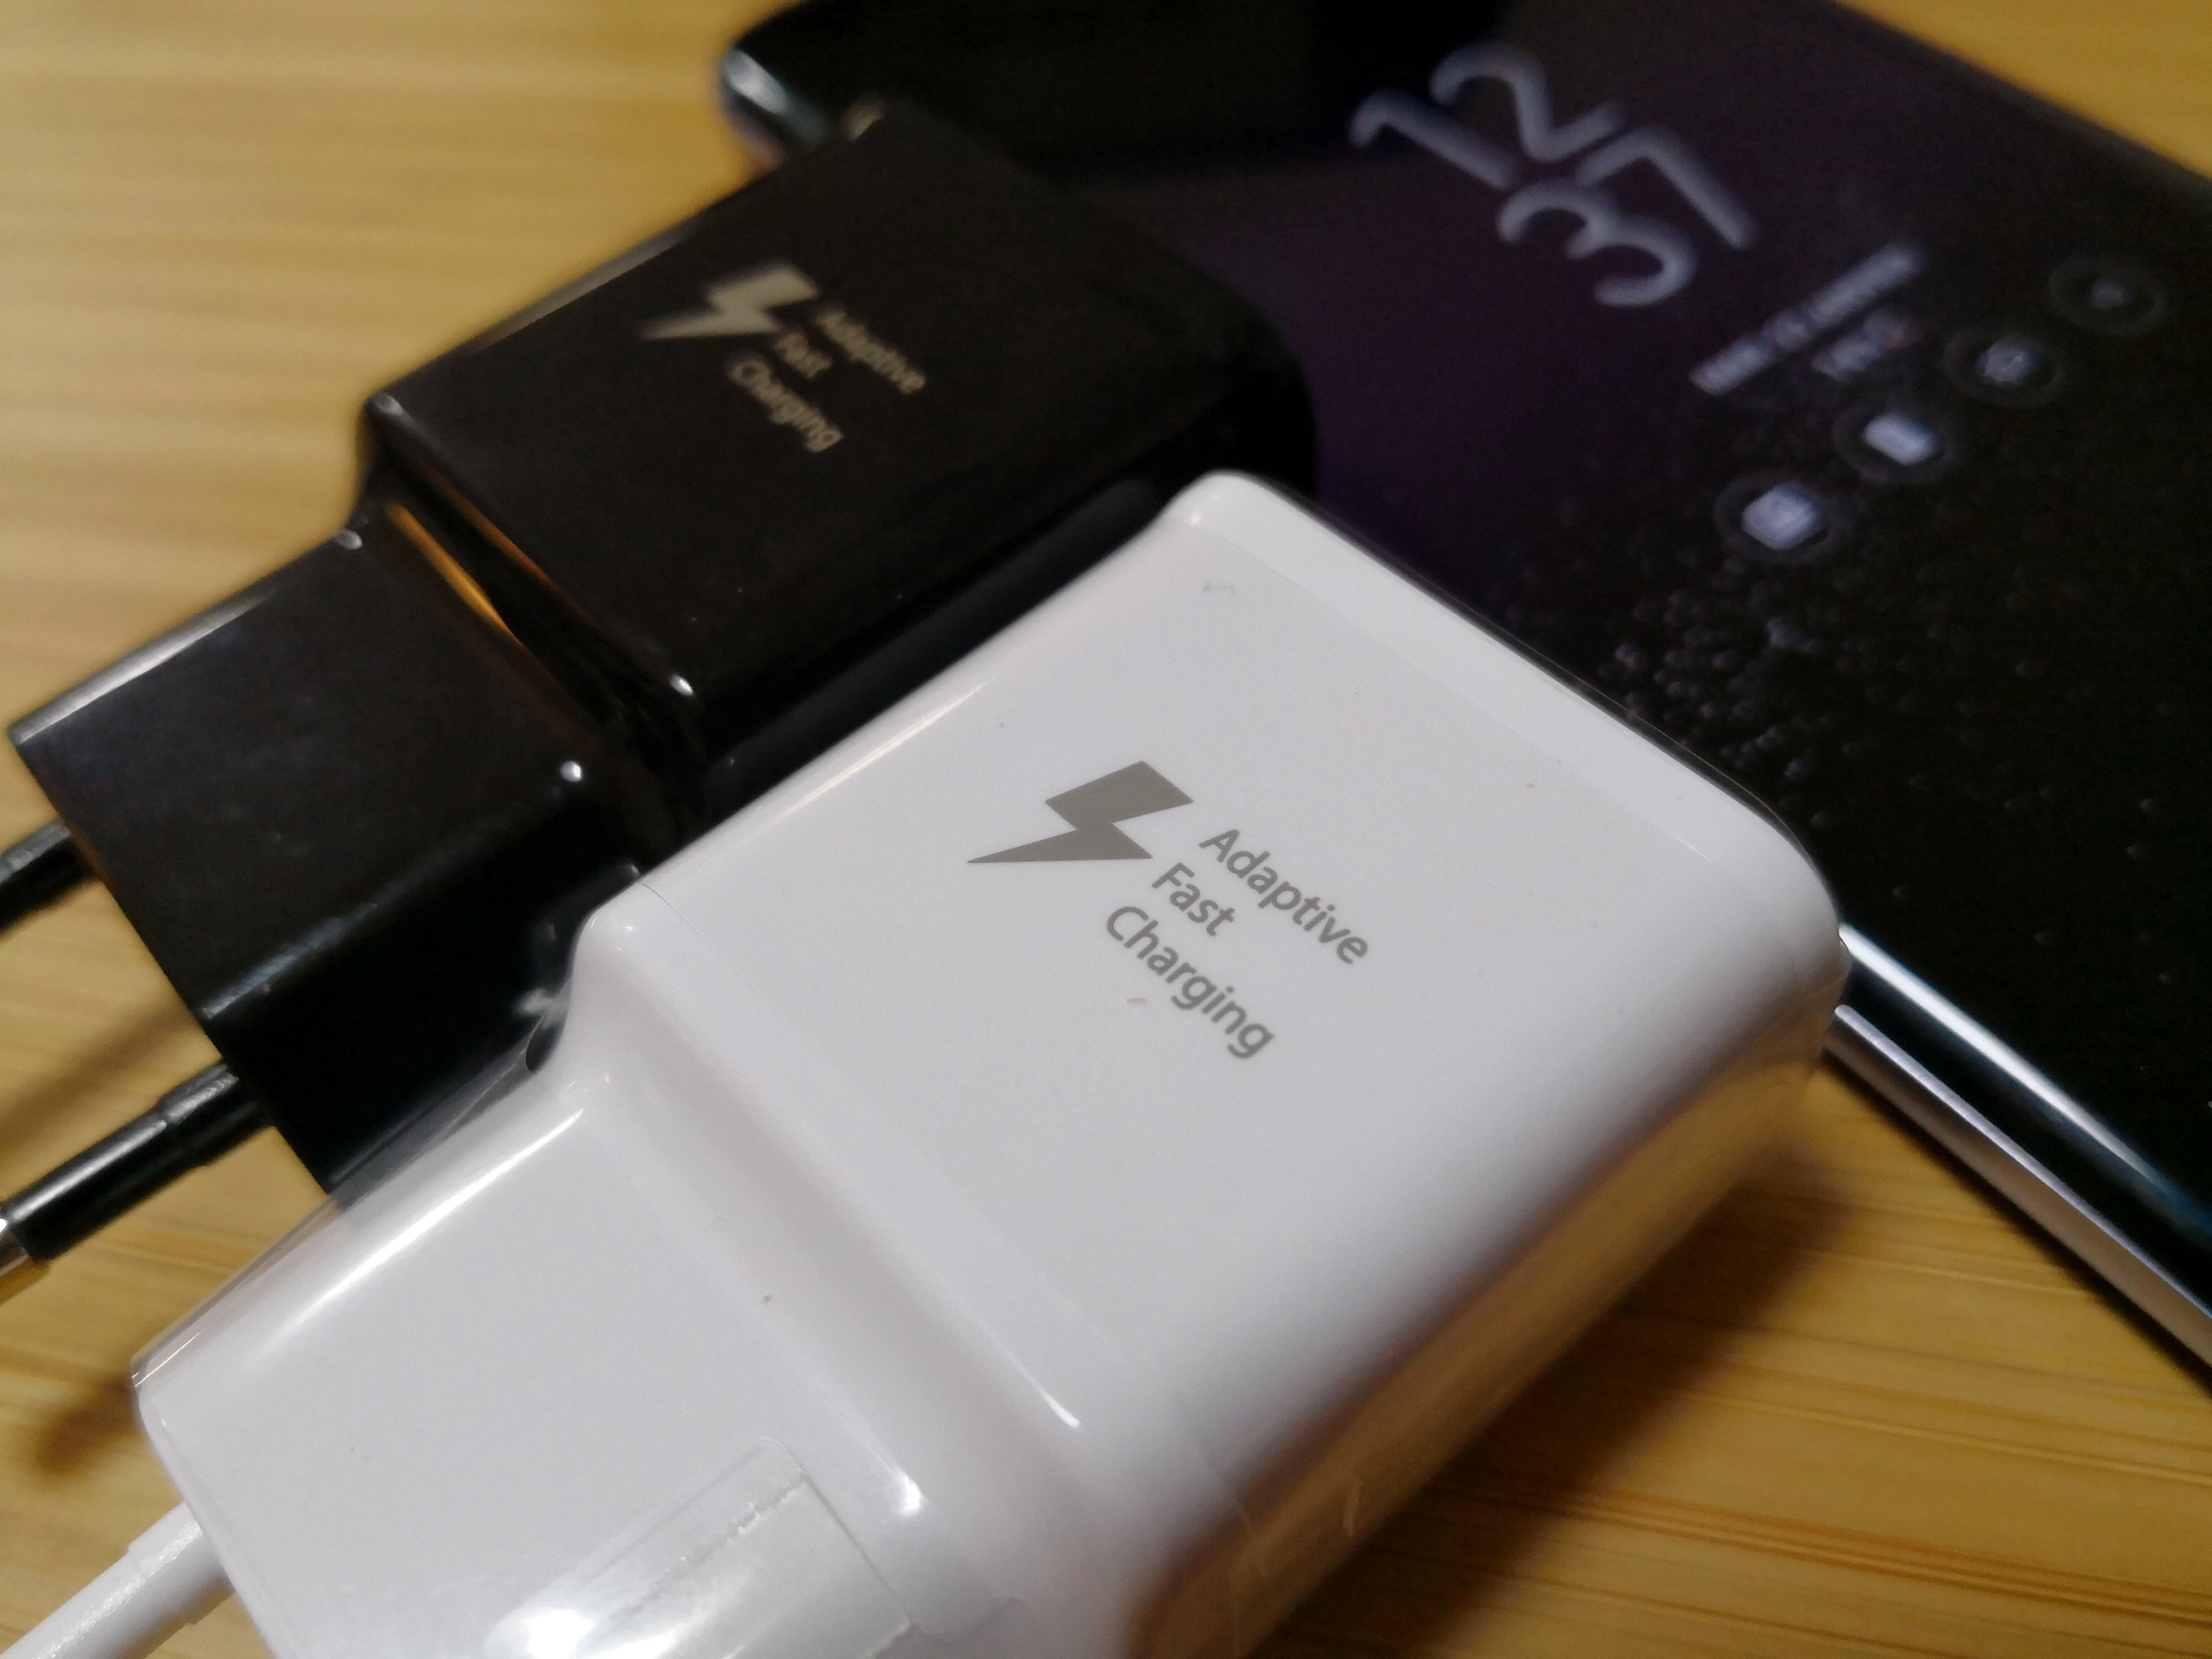 Chargeur Samsung Galaxy S9 - Chargeur Rapide